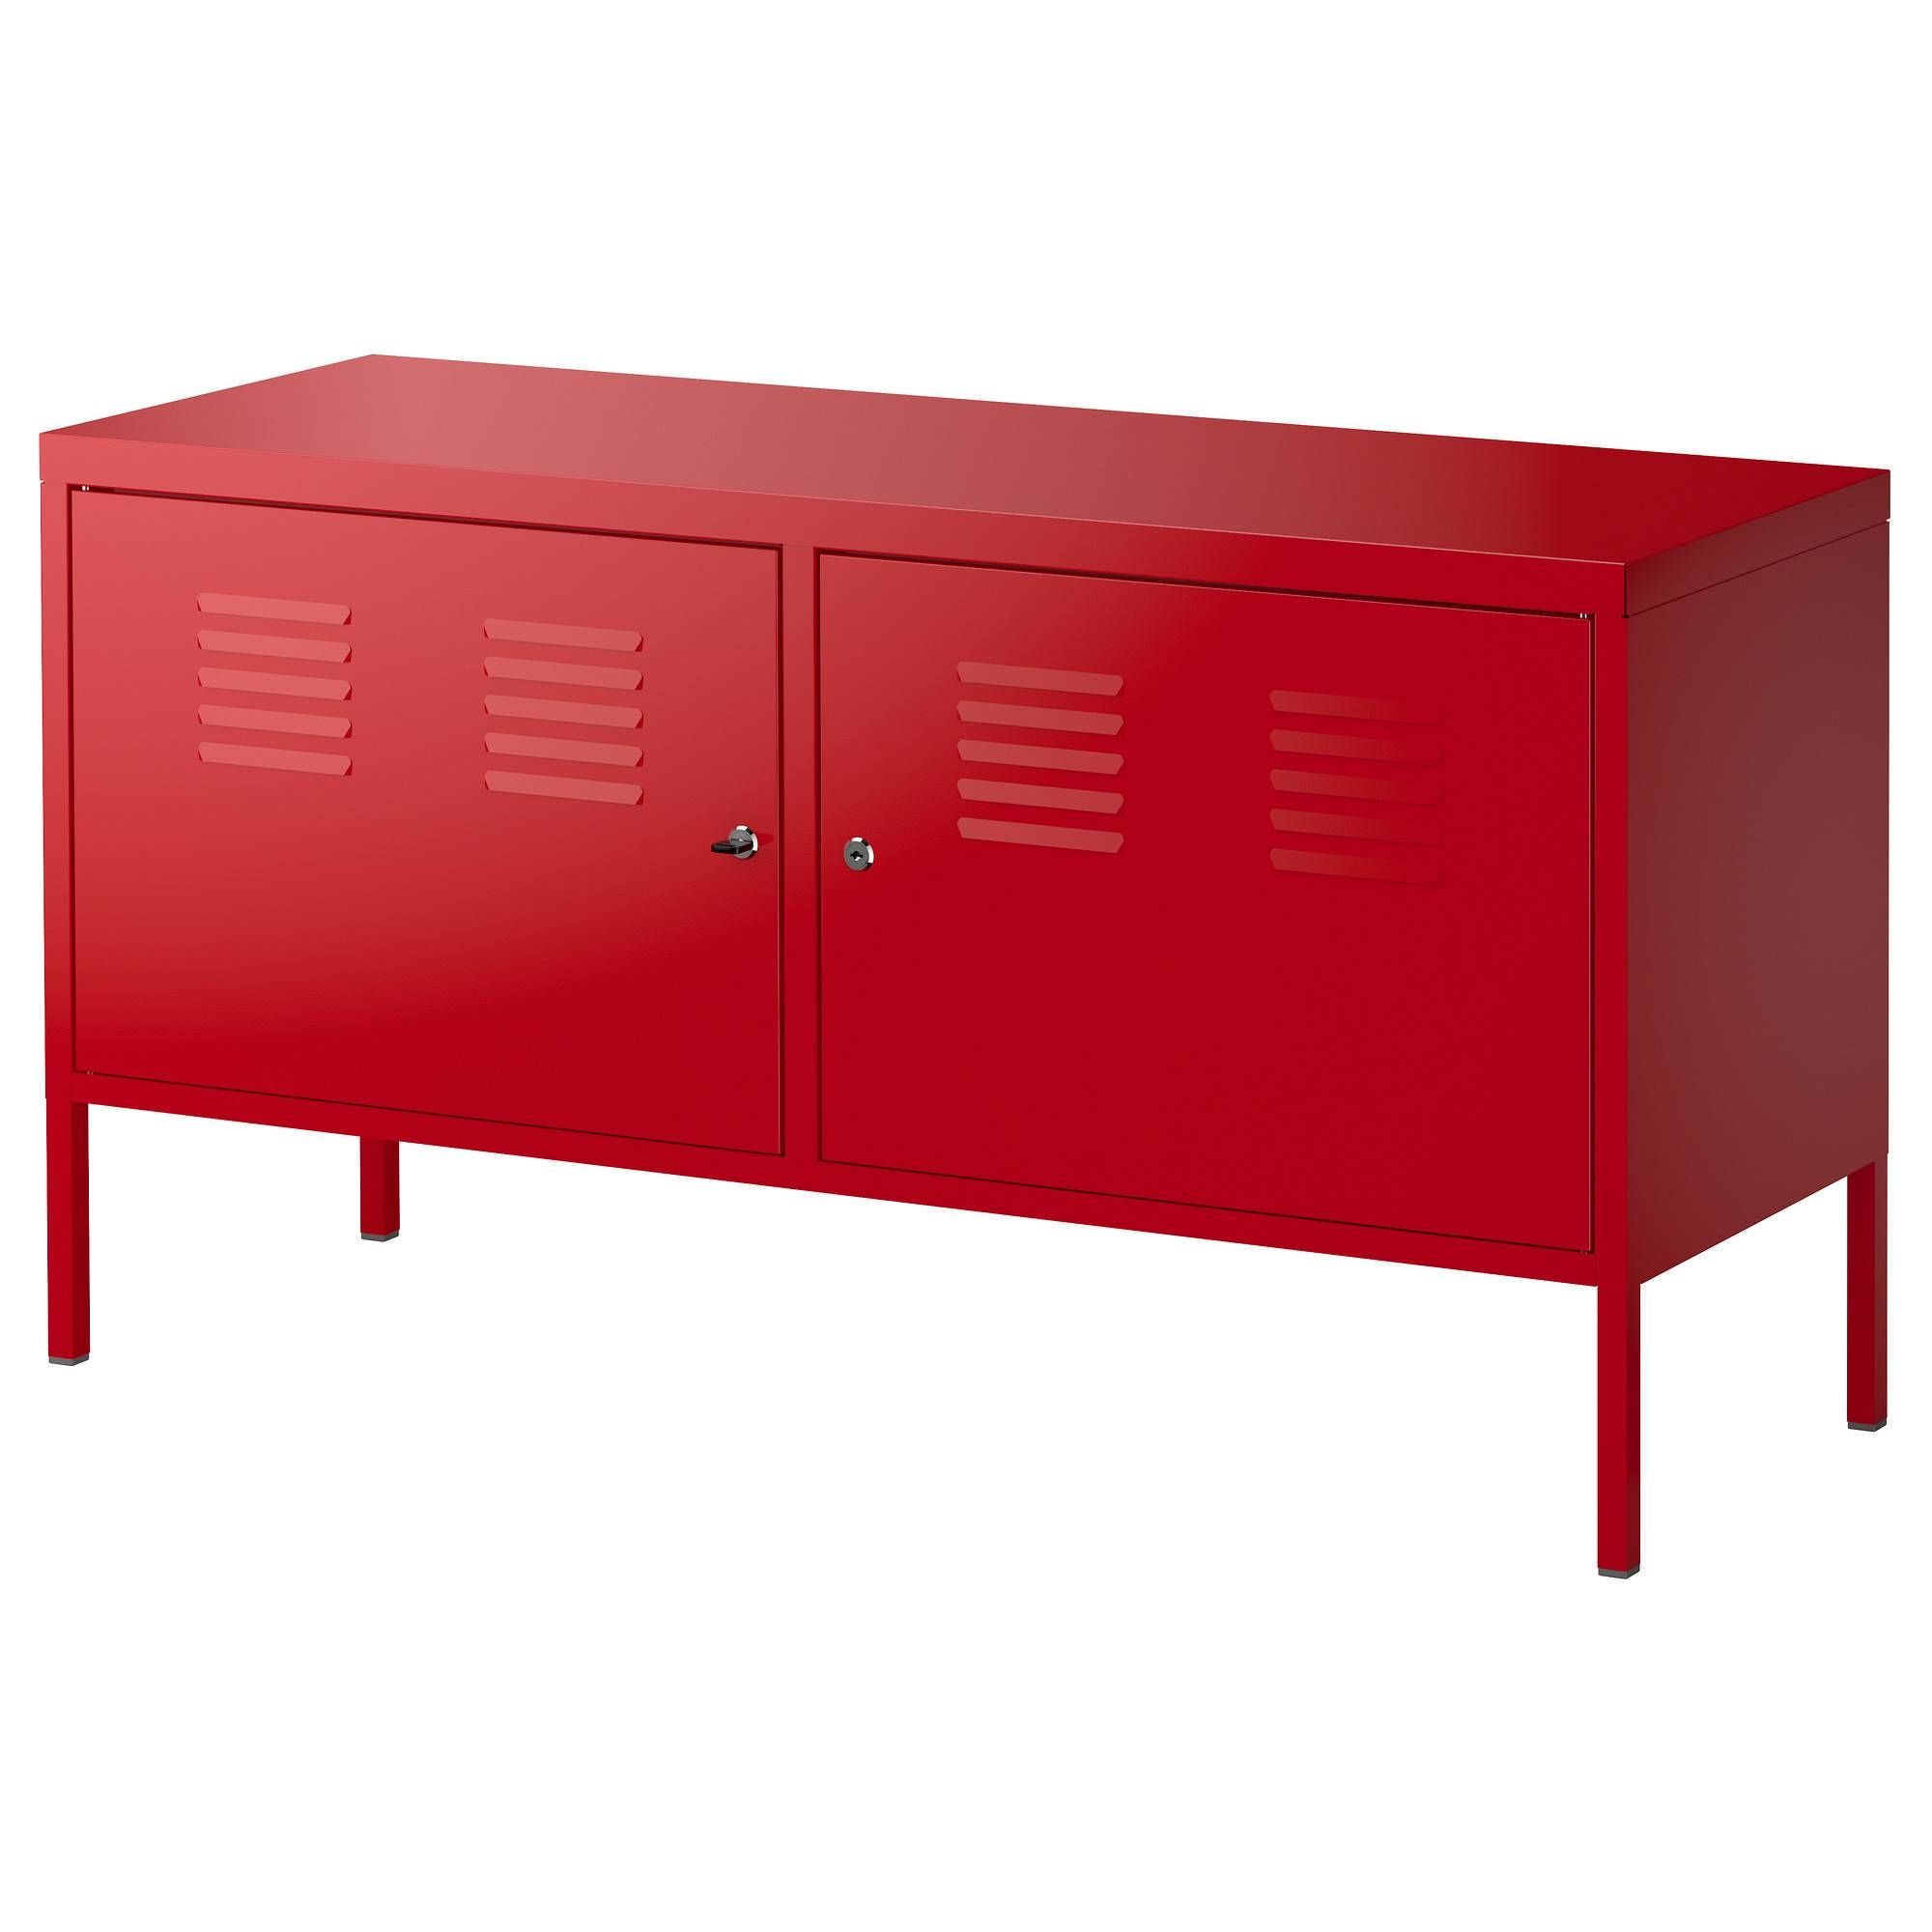 Ikea Ps Cabinet – Red – Ikea With Regard To Red Tv Cabinets (View 5 of 15)